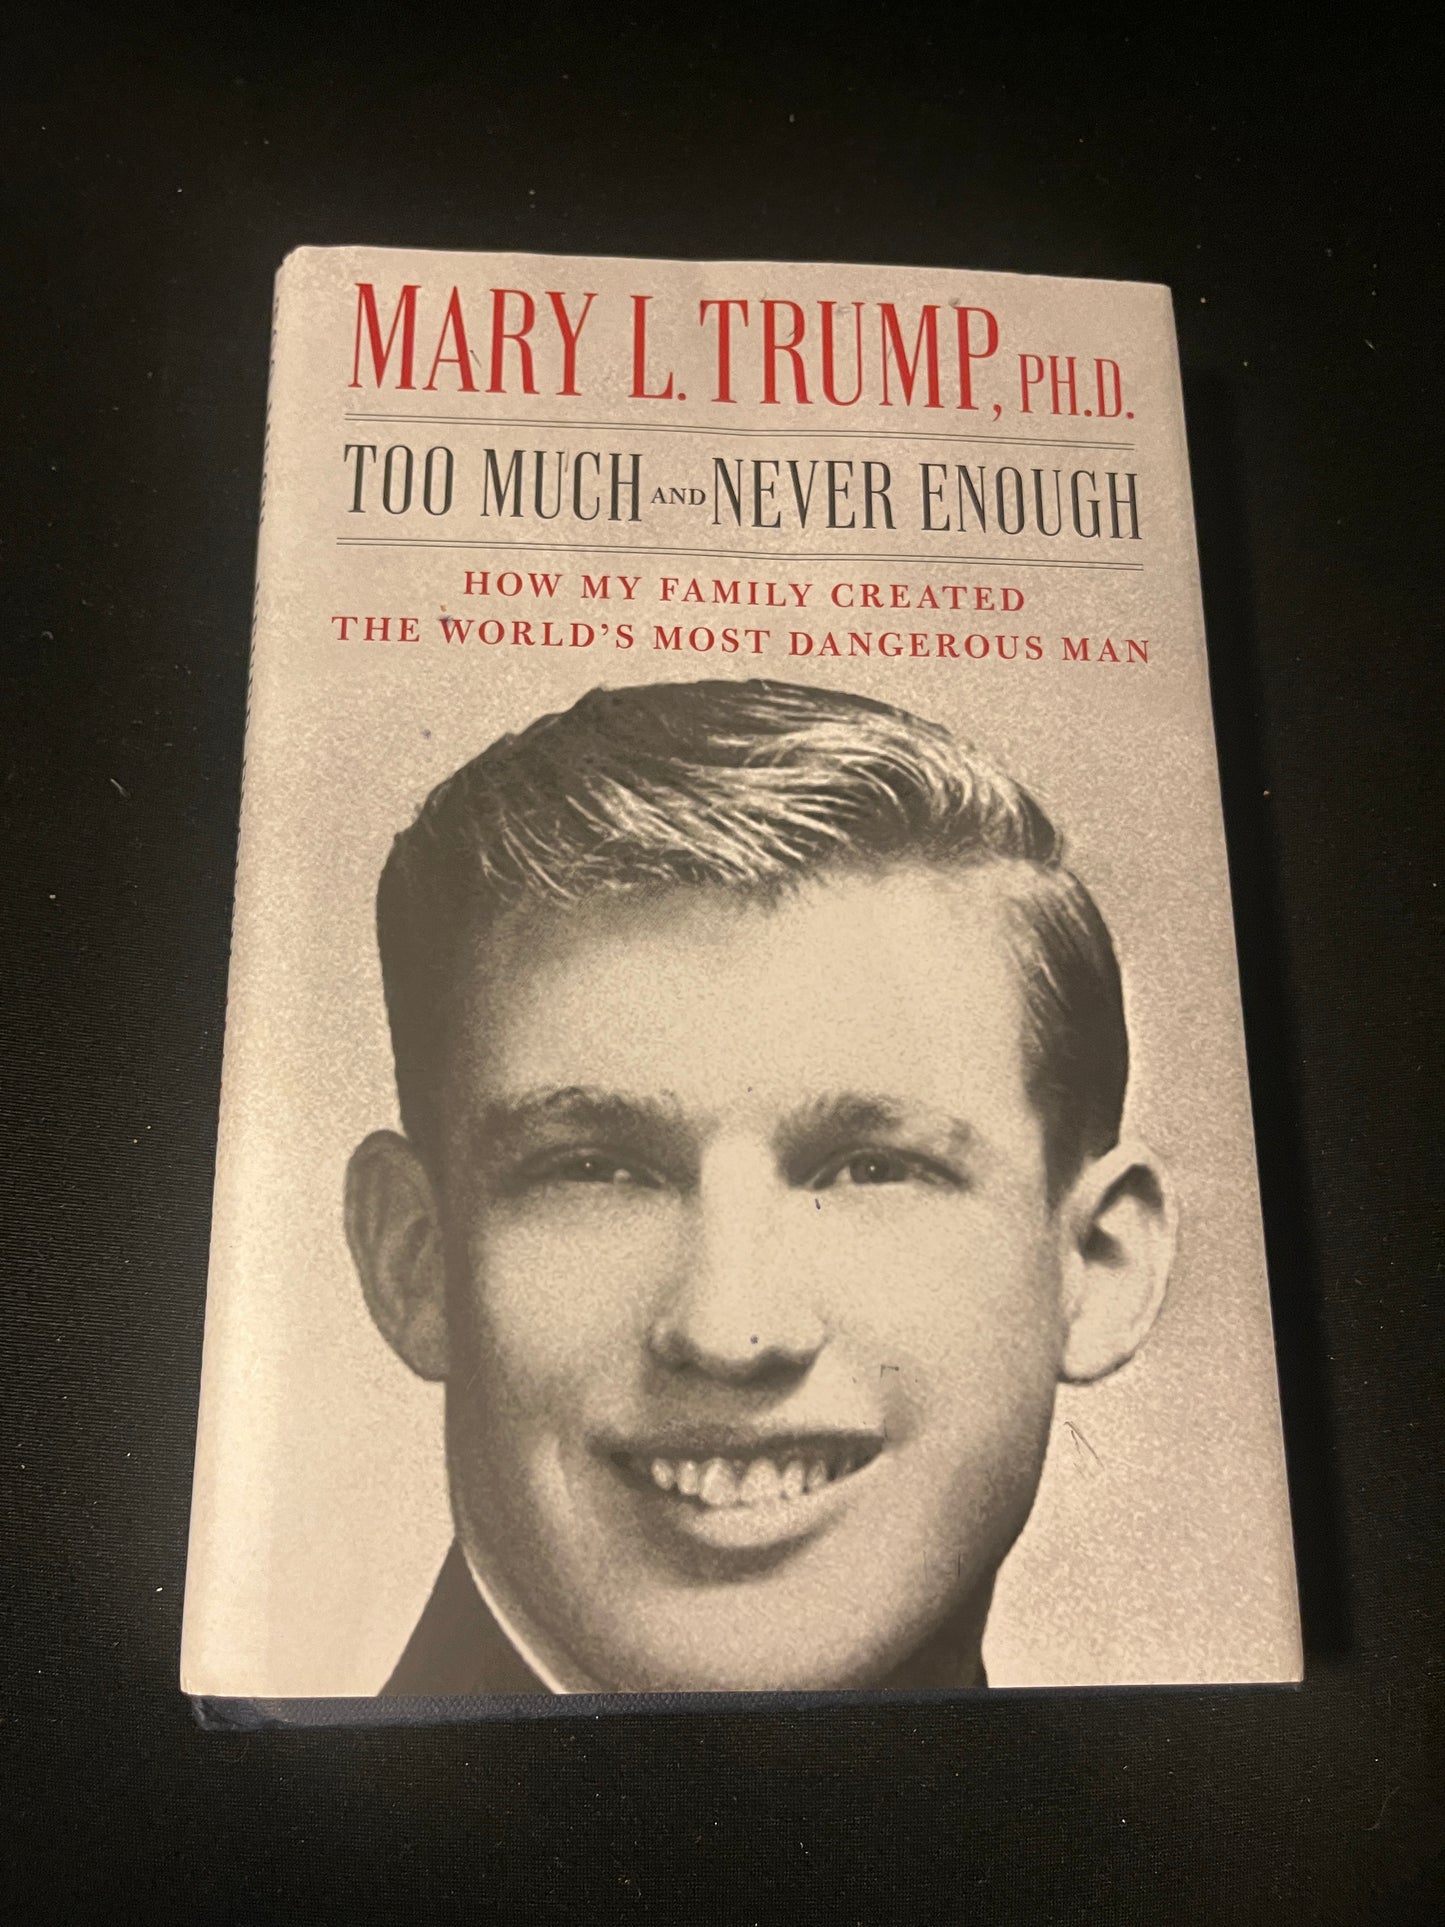 TOO MUCH AND NEVER ENOUGH: HOW MY FAMILY CREATED THE WORLDS MOST DANGEROUS MAN by Mary L. Trump